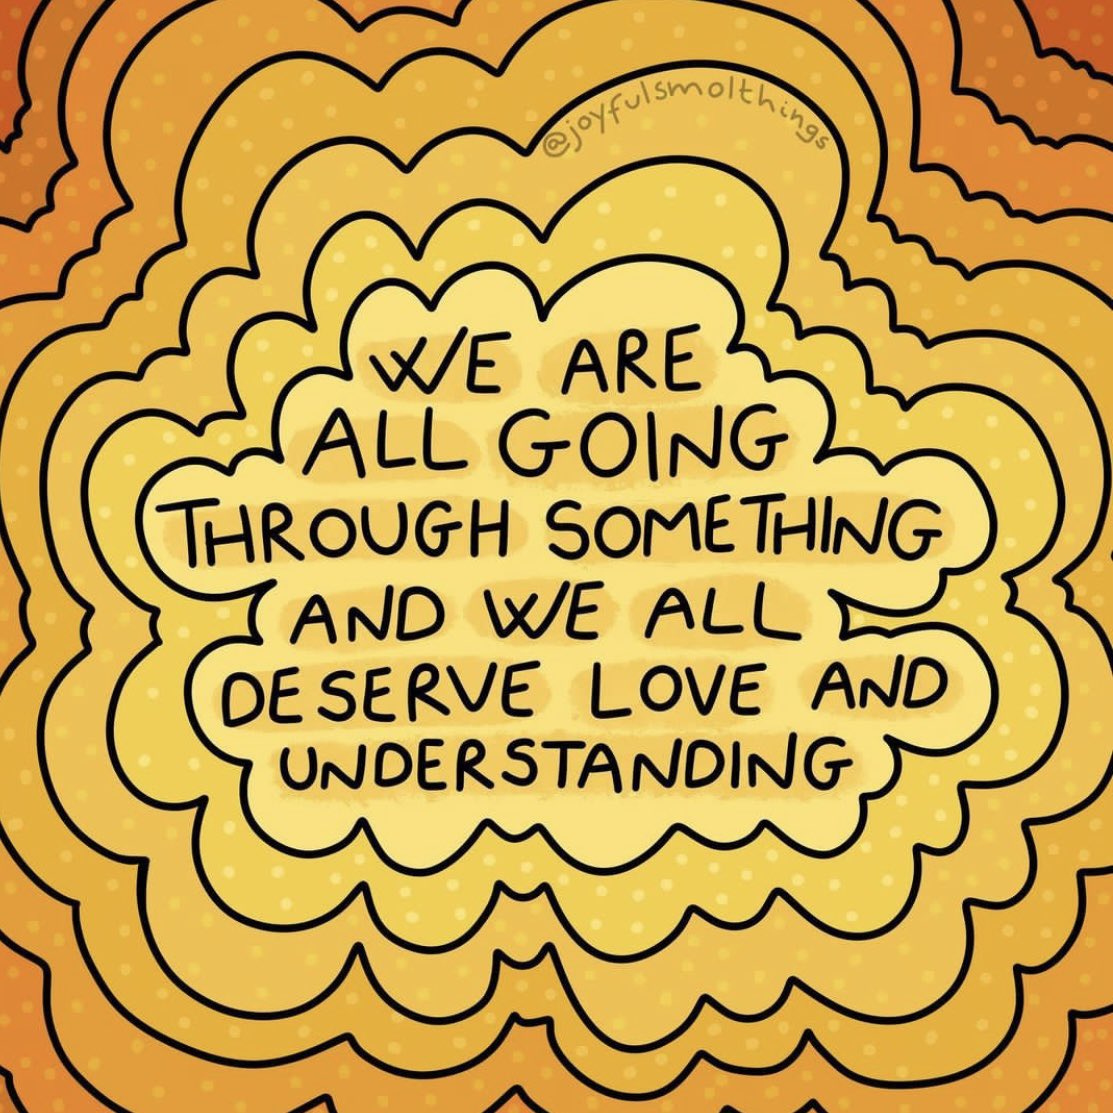 We are all going through something and we all deserve love and understanding Image: instagram.com/joyfulsmolthin…